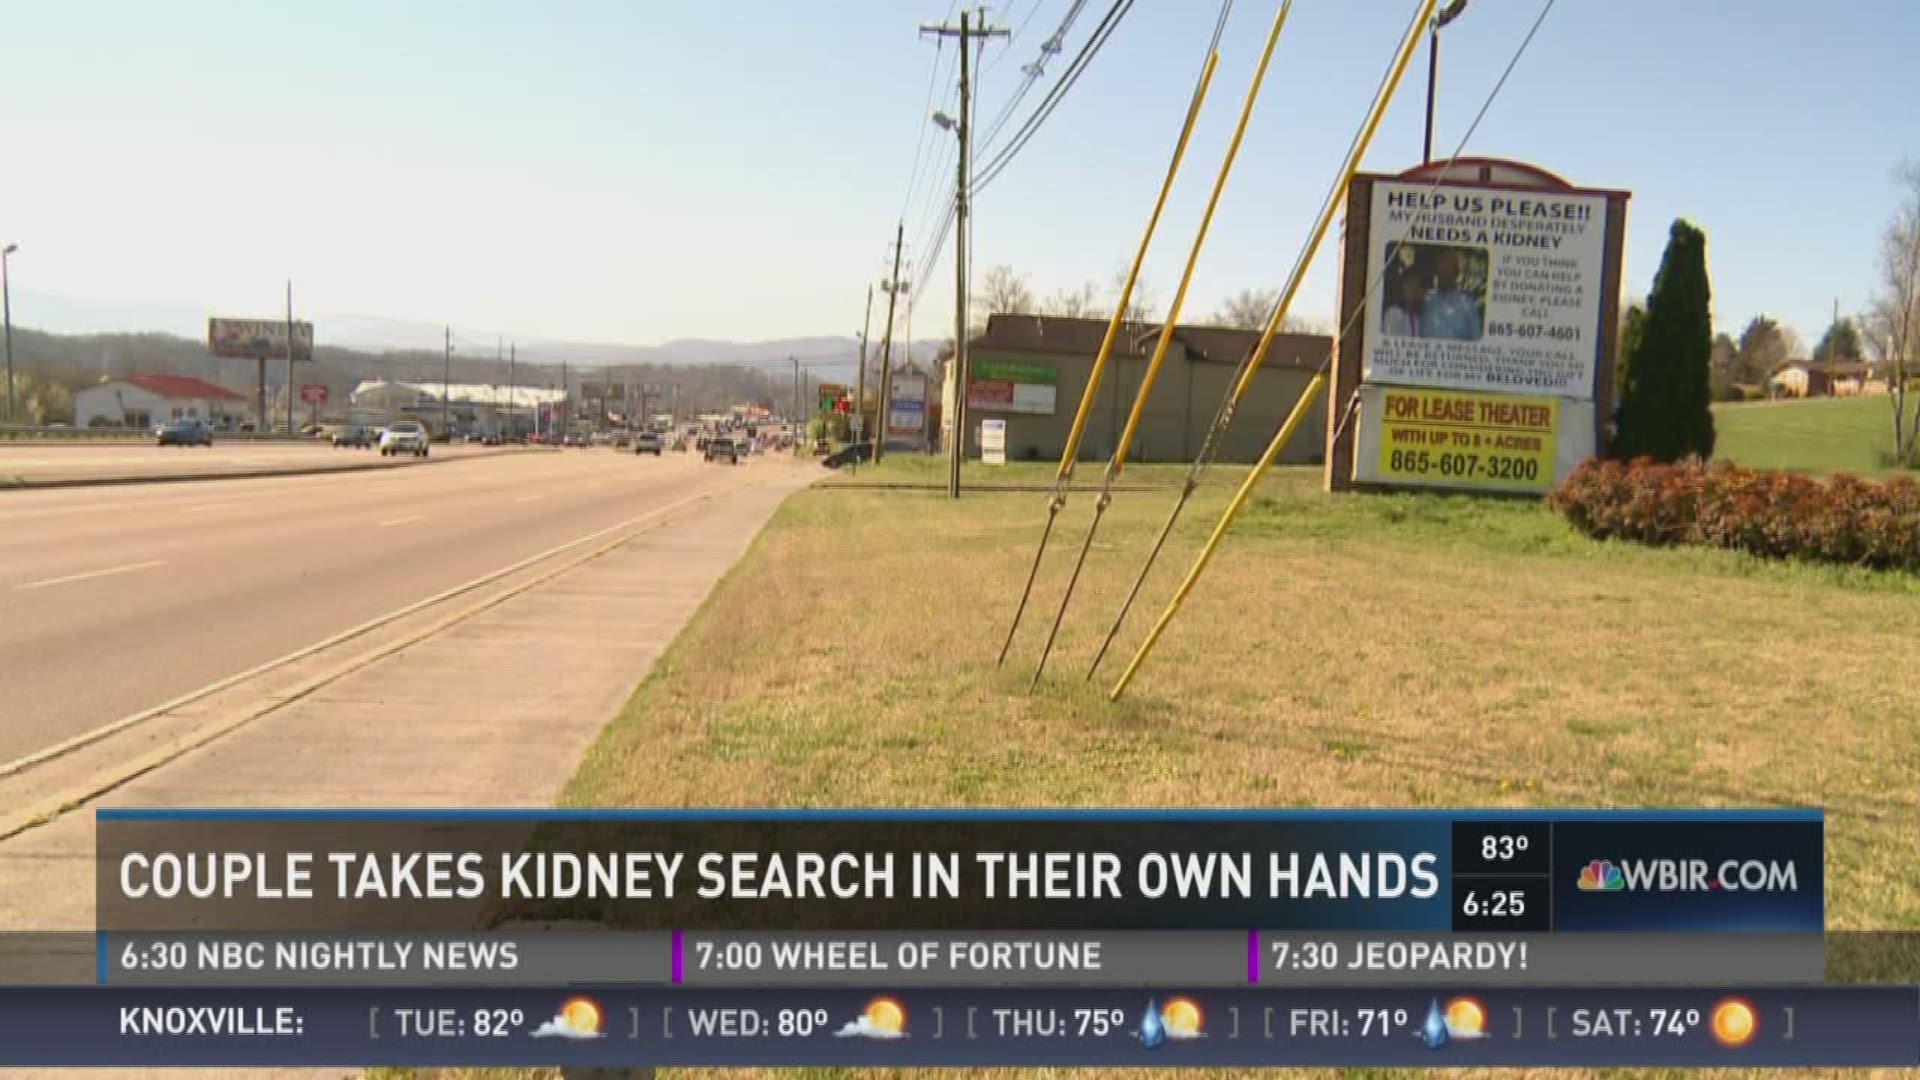 More than 100,000 people across the country are waiting for kidney transplants - thousands in Tennessee - with no clear fix in sight. 10News reporter Michael Crowe speaks to one couple in search of a donor with an unusual way of going about it. (4/18/16)